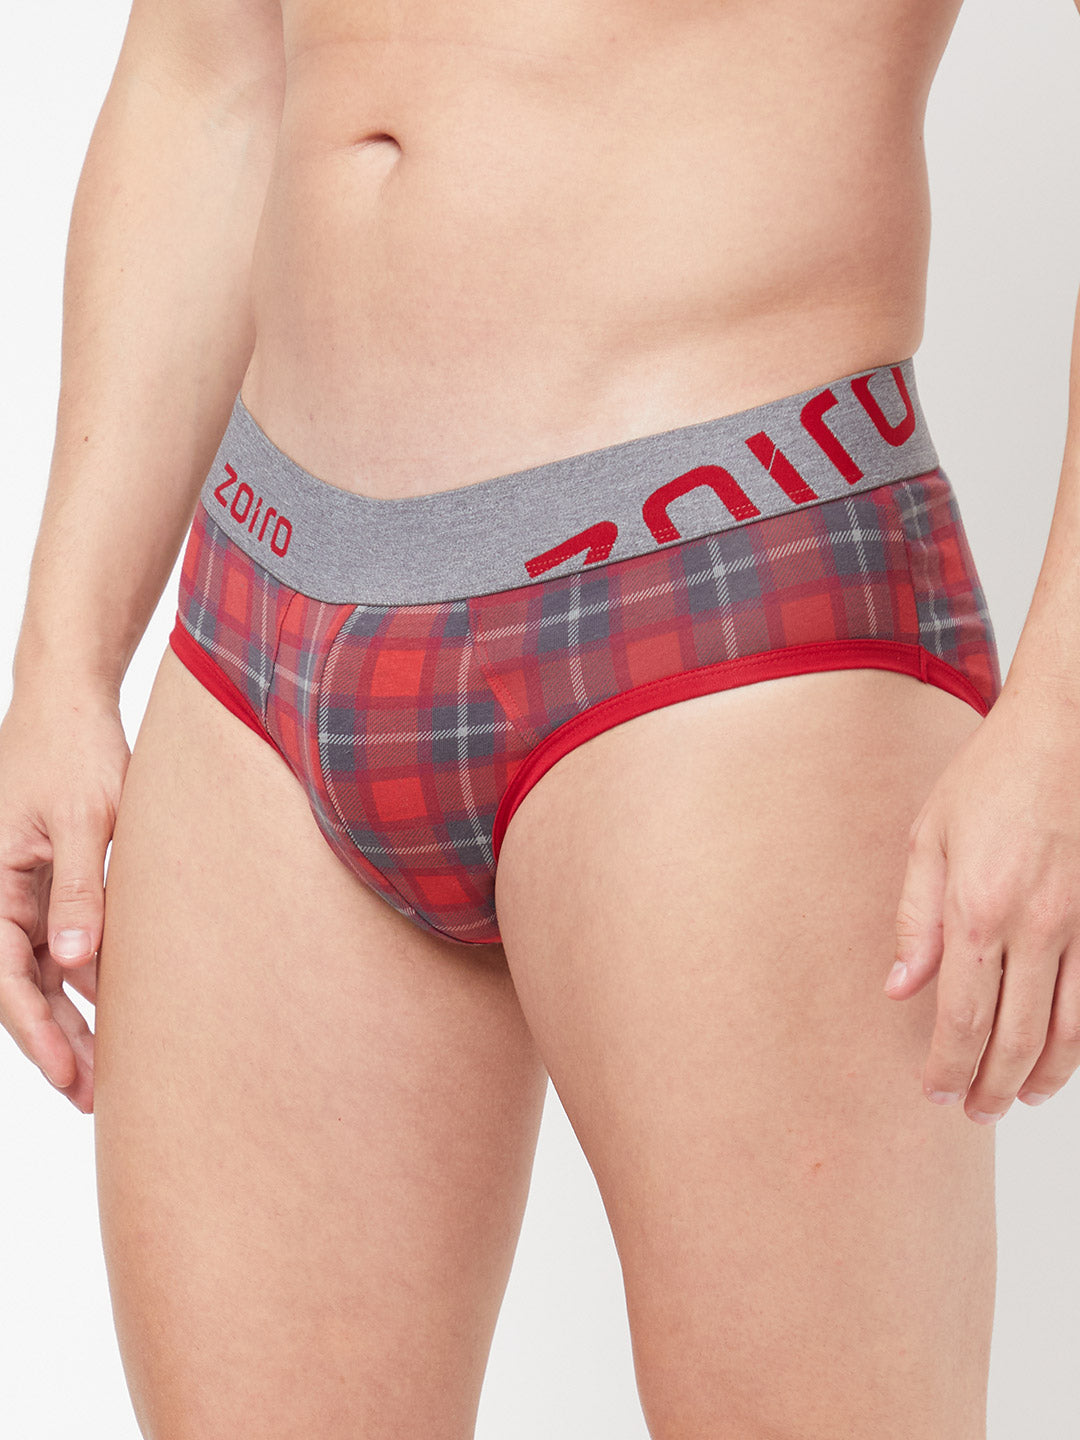 Zoiro Men&#39;s Cotton Trends Printed Brief - Chinese Red